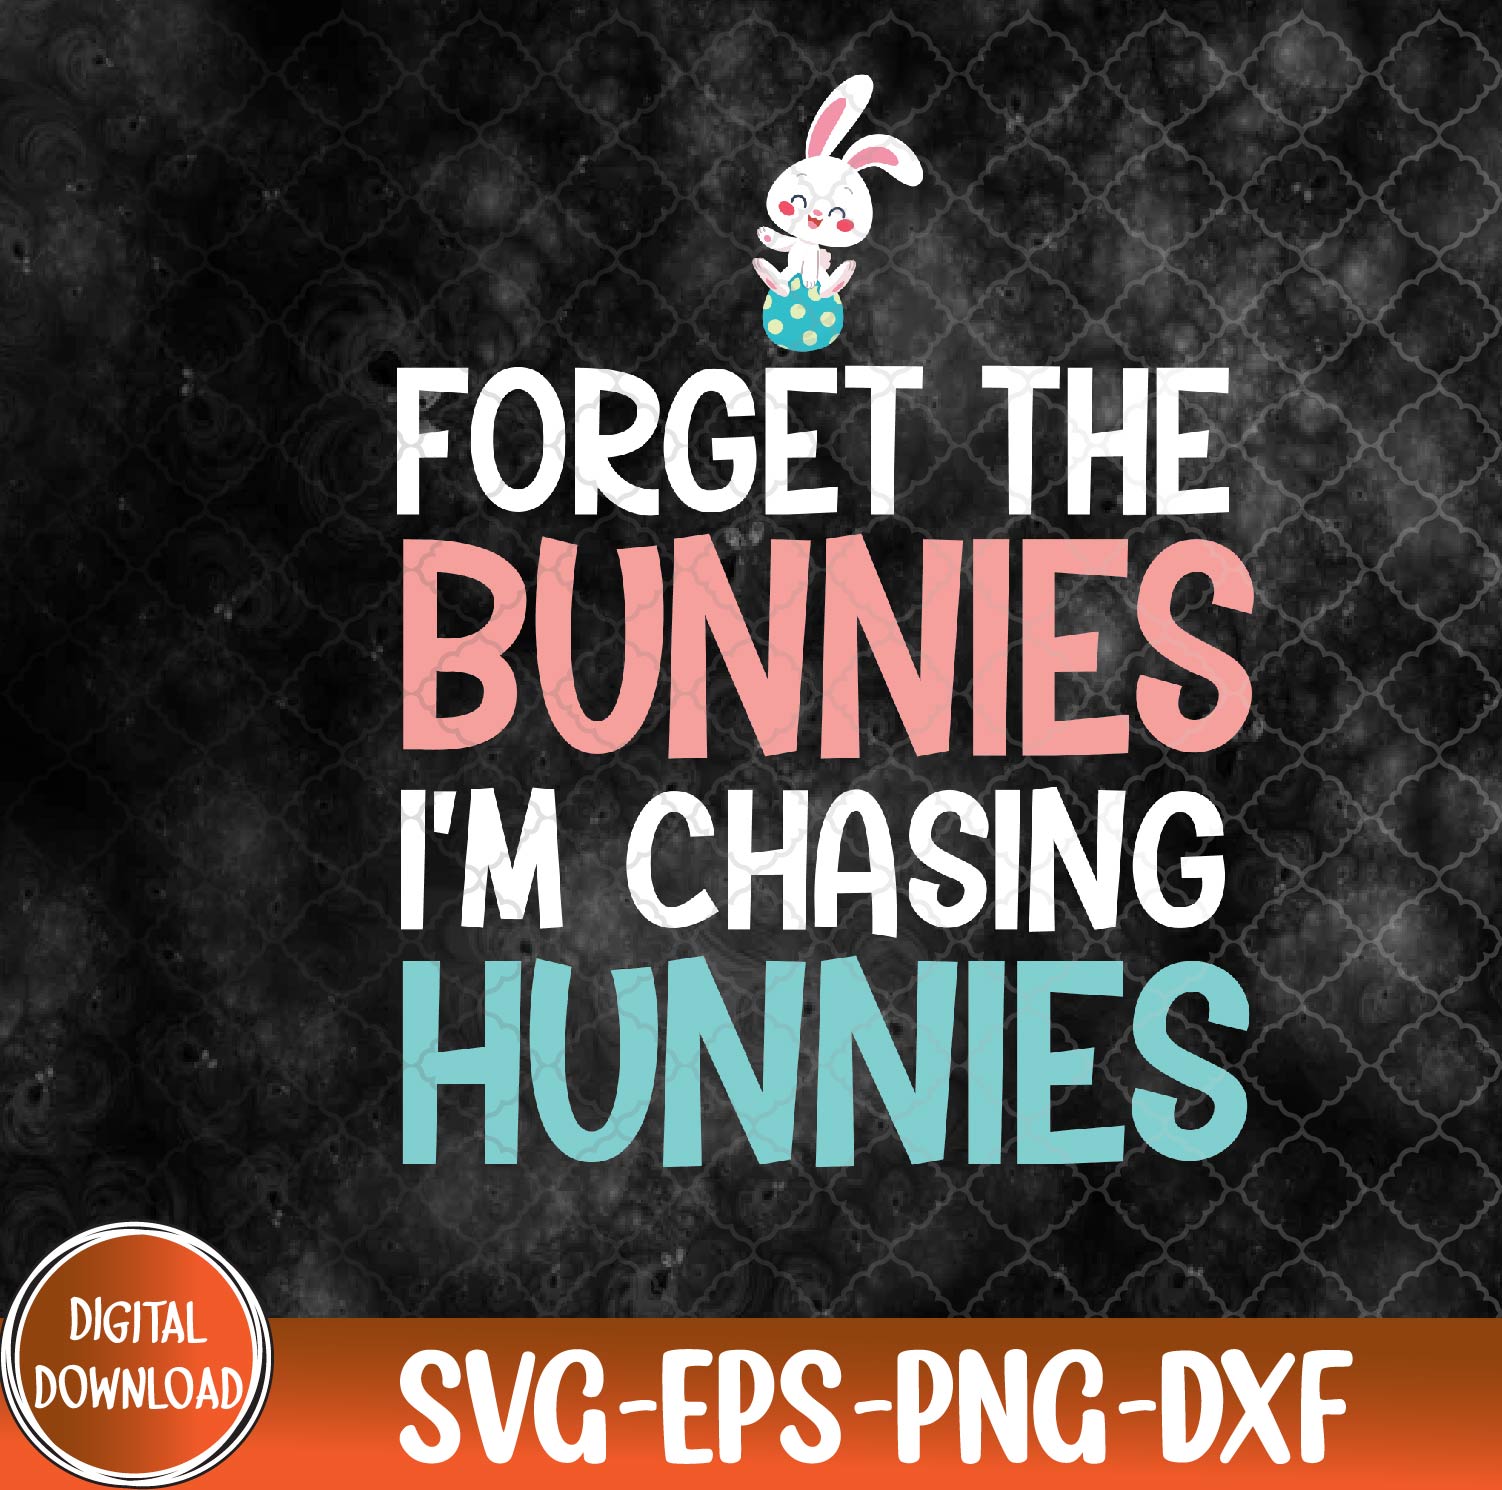 WTMNEW9file 09 16 Forget The Bunnies I'm Chasing Hunnies Funny Easter Svg, Eps, Png, Dxf